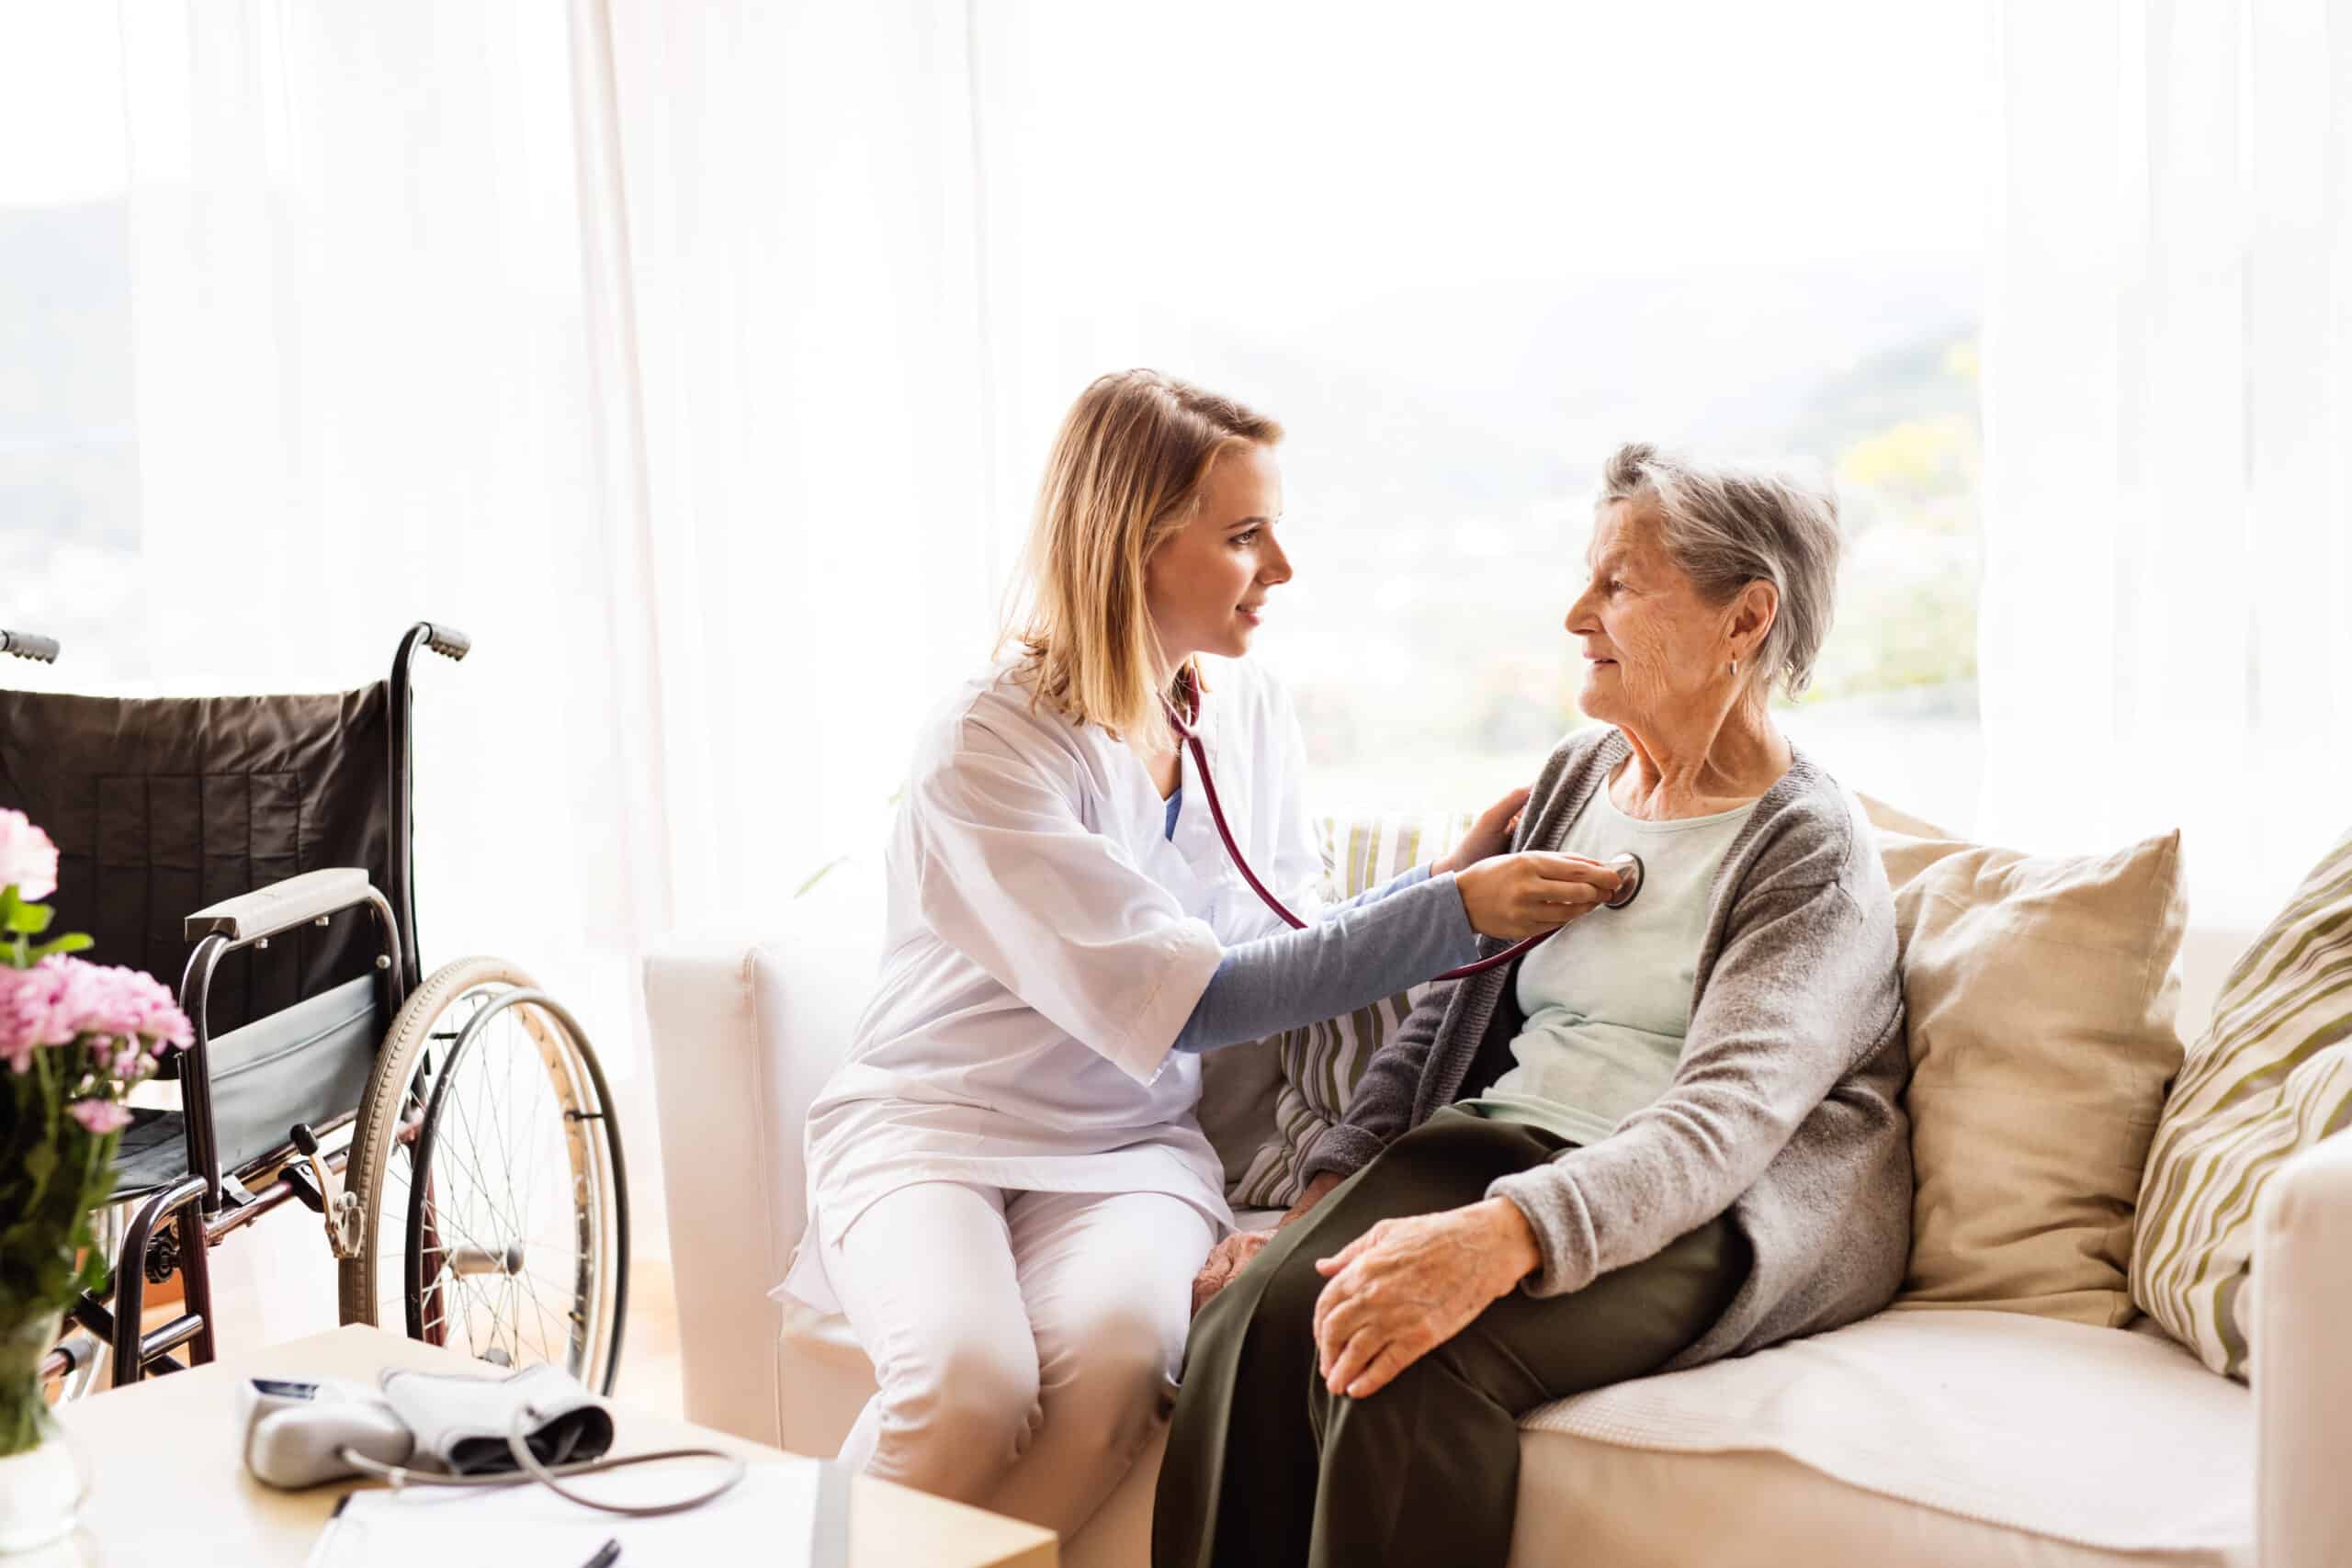 A home health nurse sits with a patient on a couch. She has a stethoscope and is listening to the patient's heart.